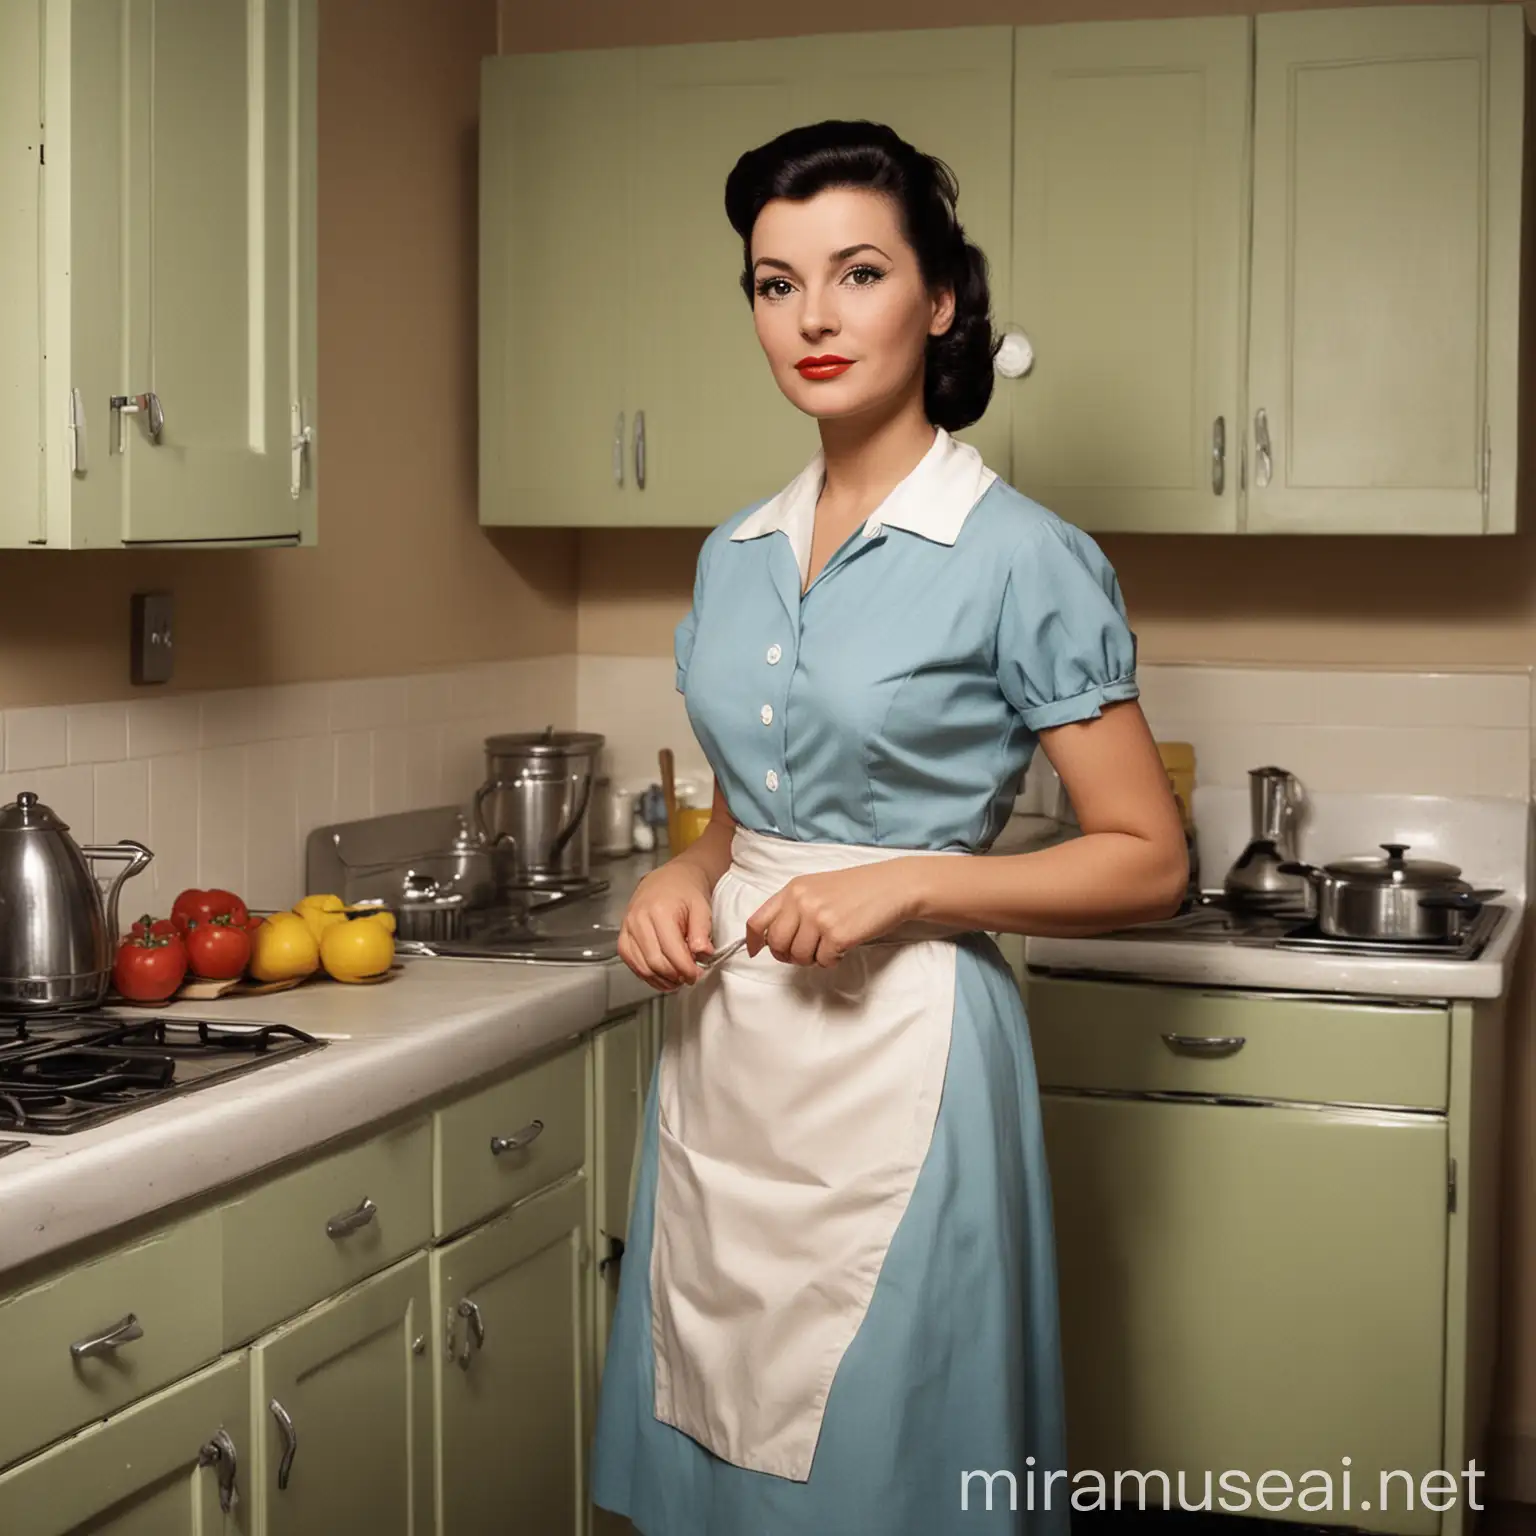 housewife, 1950s style, standing in the kitchen, dark hair